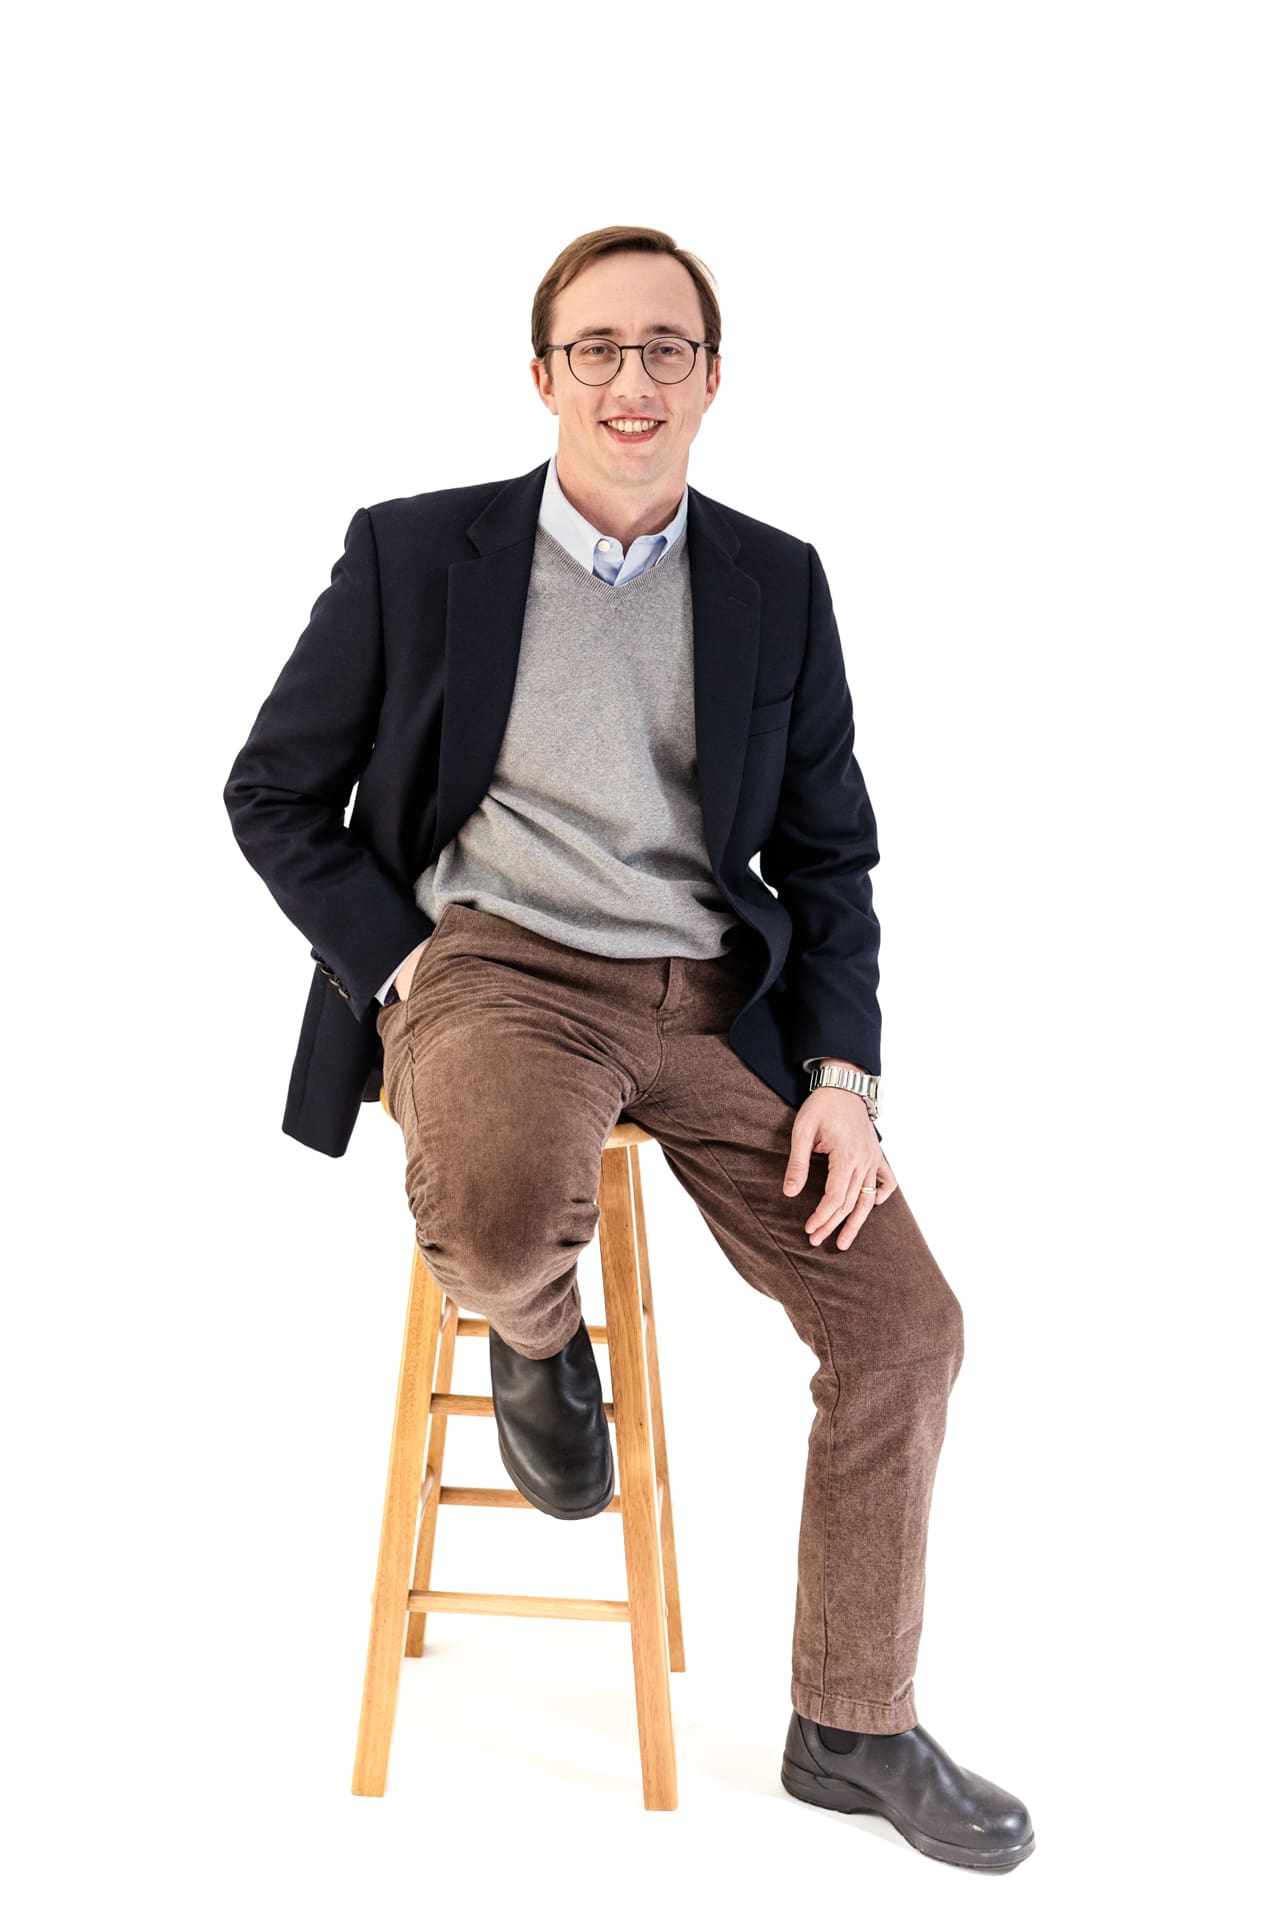 Studio portrait of man wearing business casual jacket and brown pants sitting on stool at Chicago photography studio P&M Studio